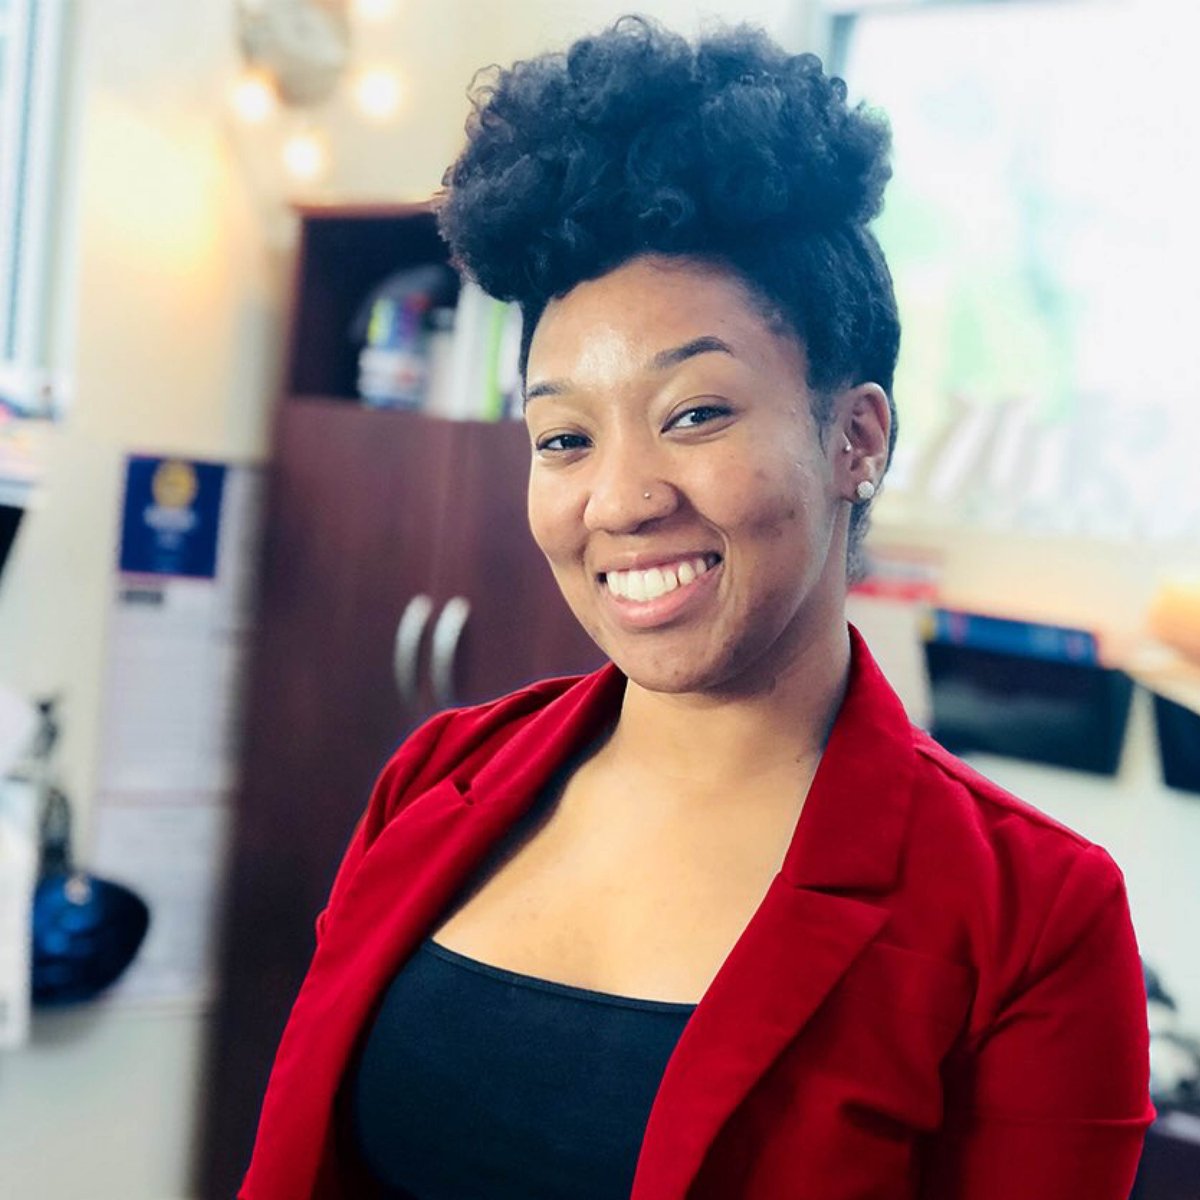 We want to give a shoutout to #WKU Faculty and Staff who give back to our community each day through their work. Today we spotlight Kayla Lofton (’15), who serves as the Diversity Recruitment Officer for @WKUAdmissions. Learn more about Kayla at bit.ly/3gwSIBV. #BPM2021